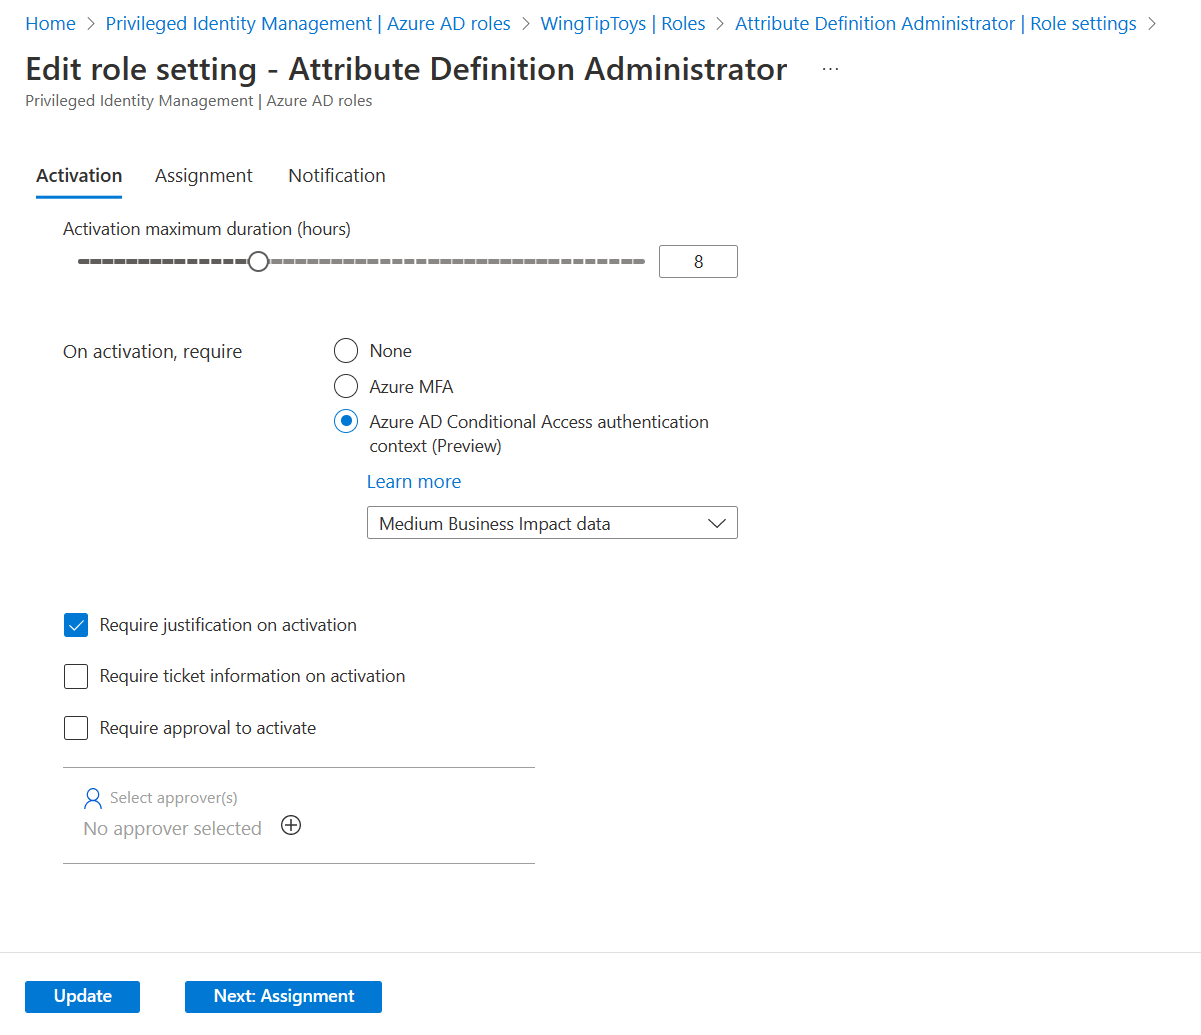 Screenshot of the Edit role setting Attribute Definition Administrator page.